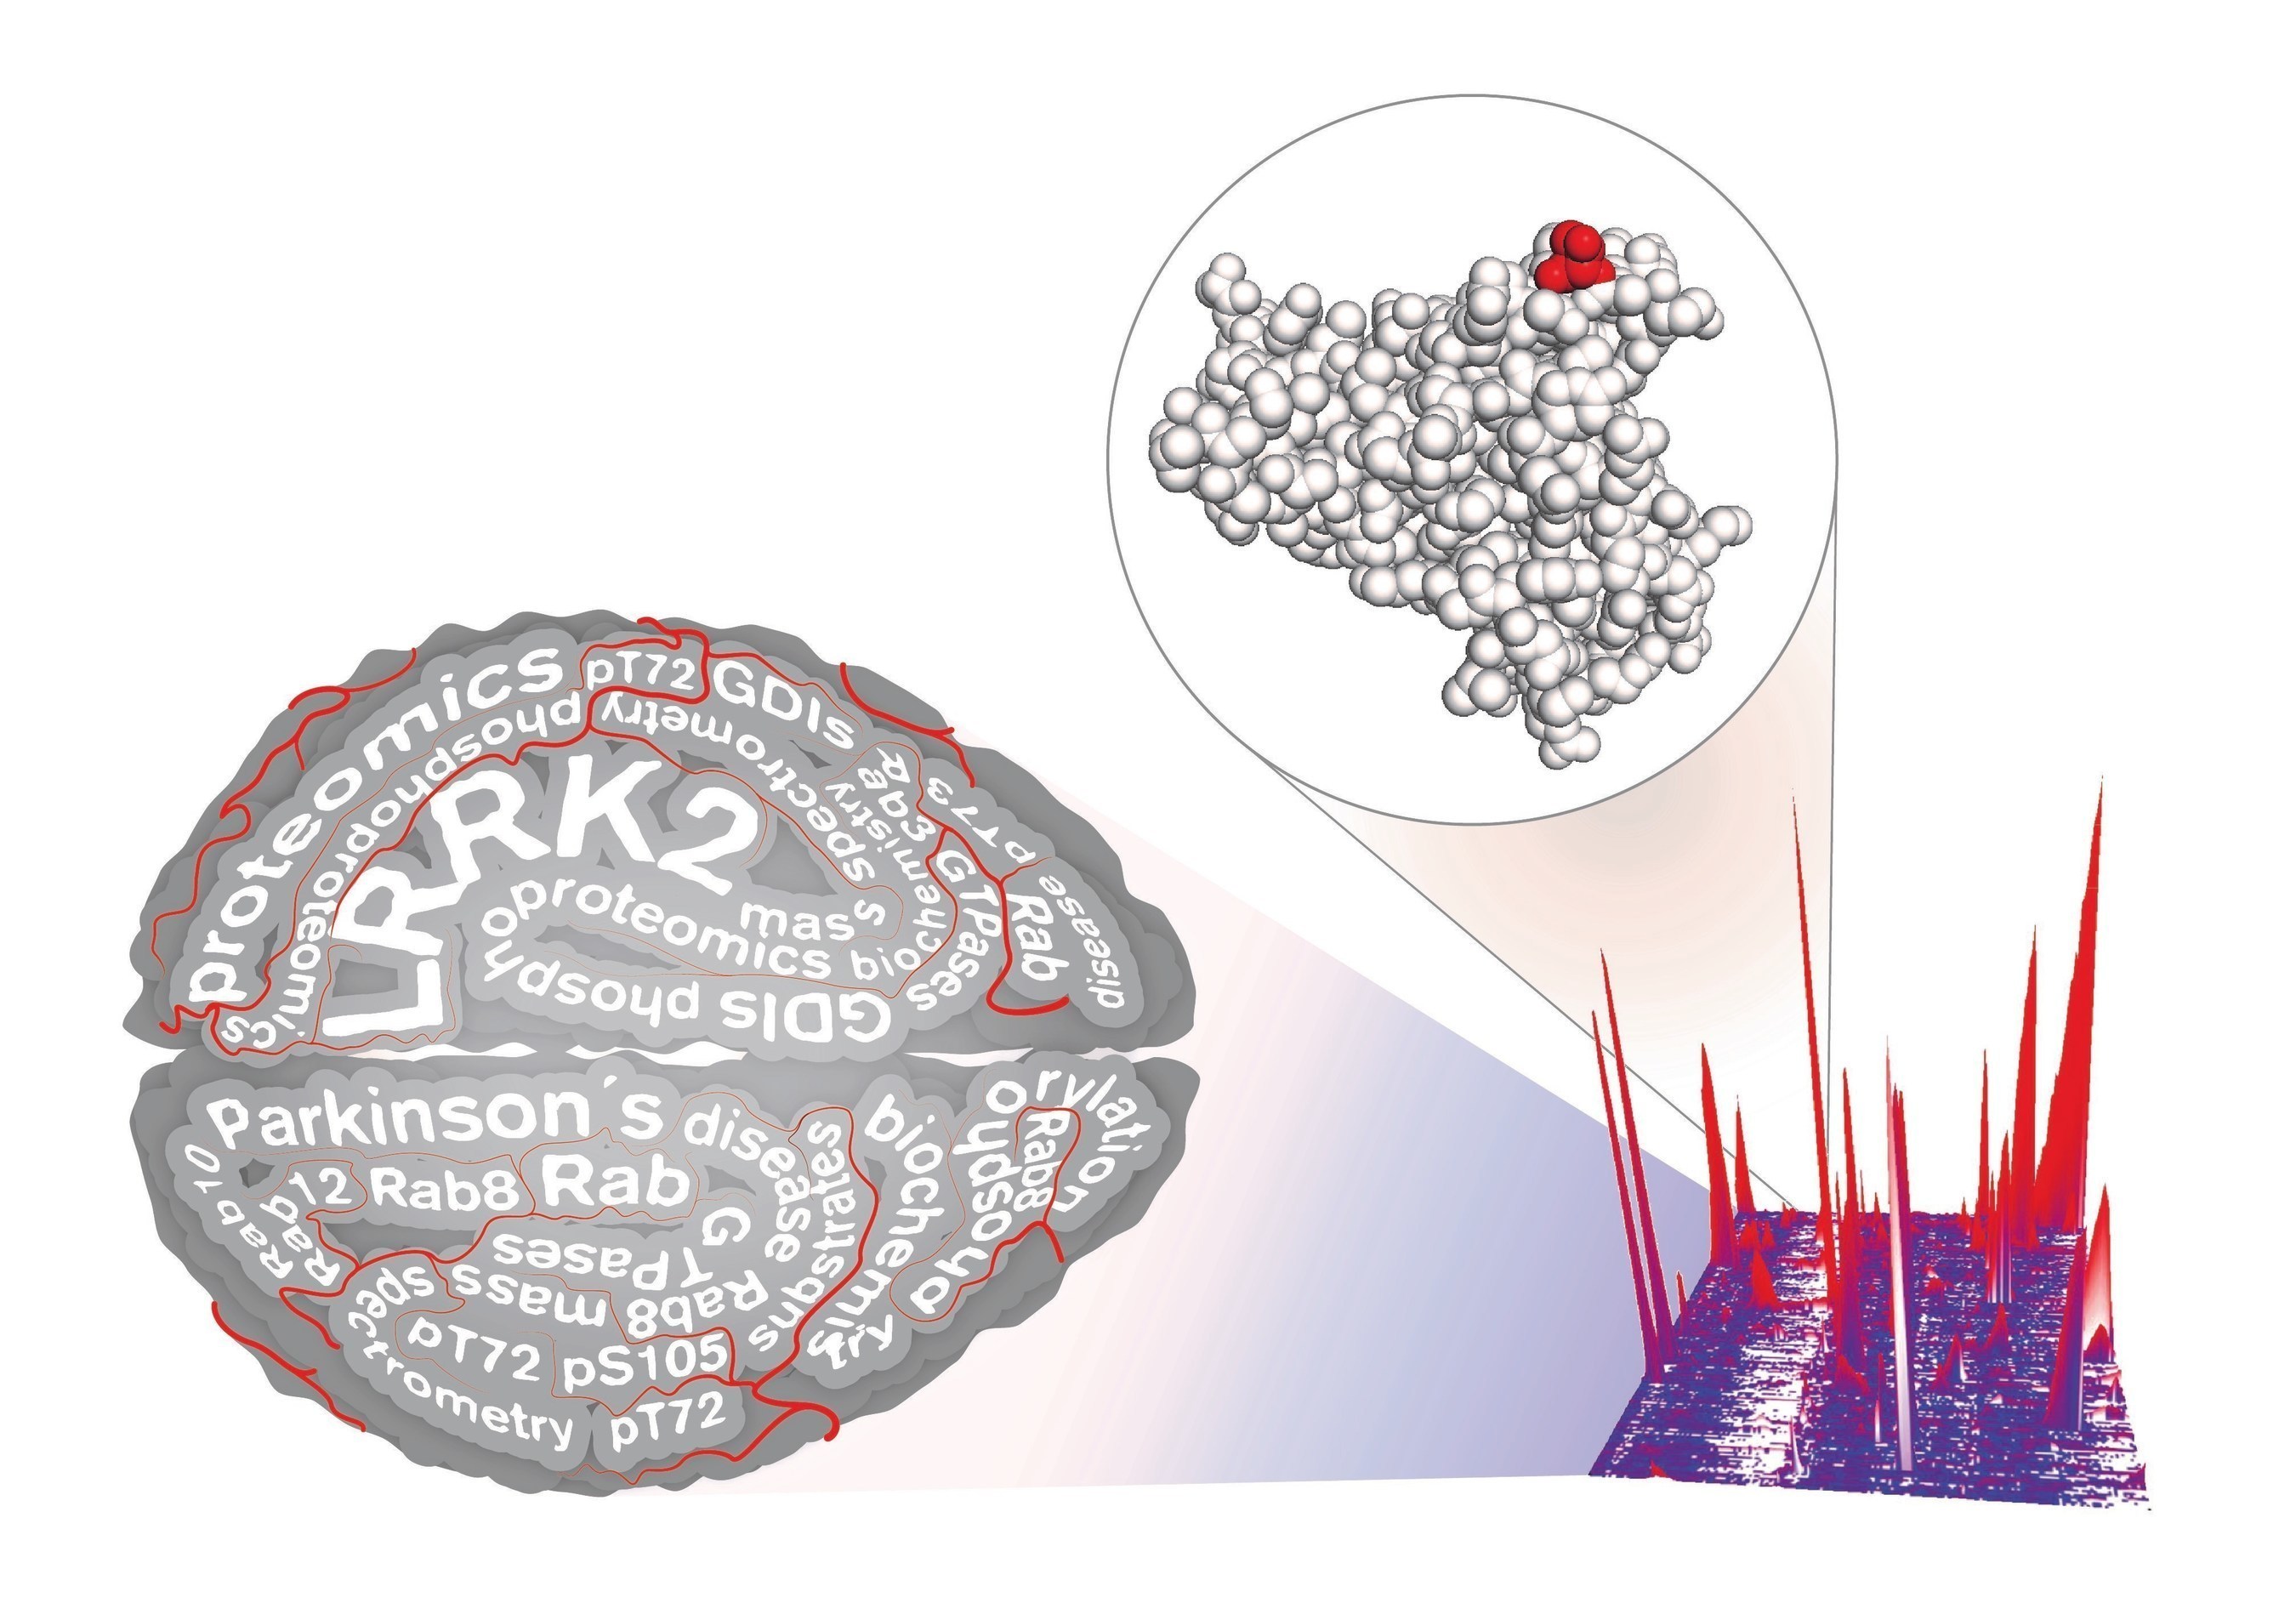 Parkinson's researchers used proteomics to identify Rab proteins as a physiologic substrate of LRRK2, a Parkinson's drug target. This finding may accelerate current research and open a novel therapeutic avenue.